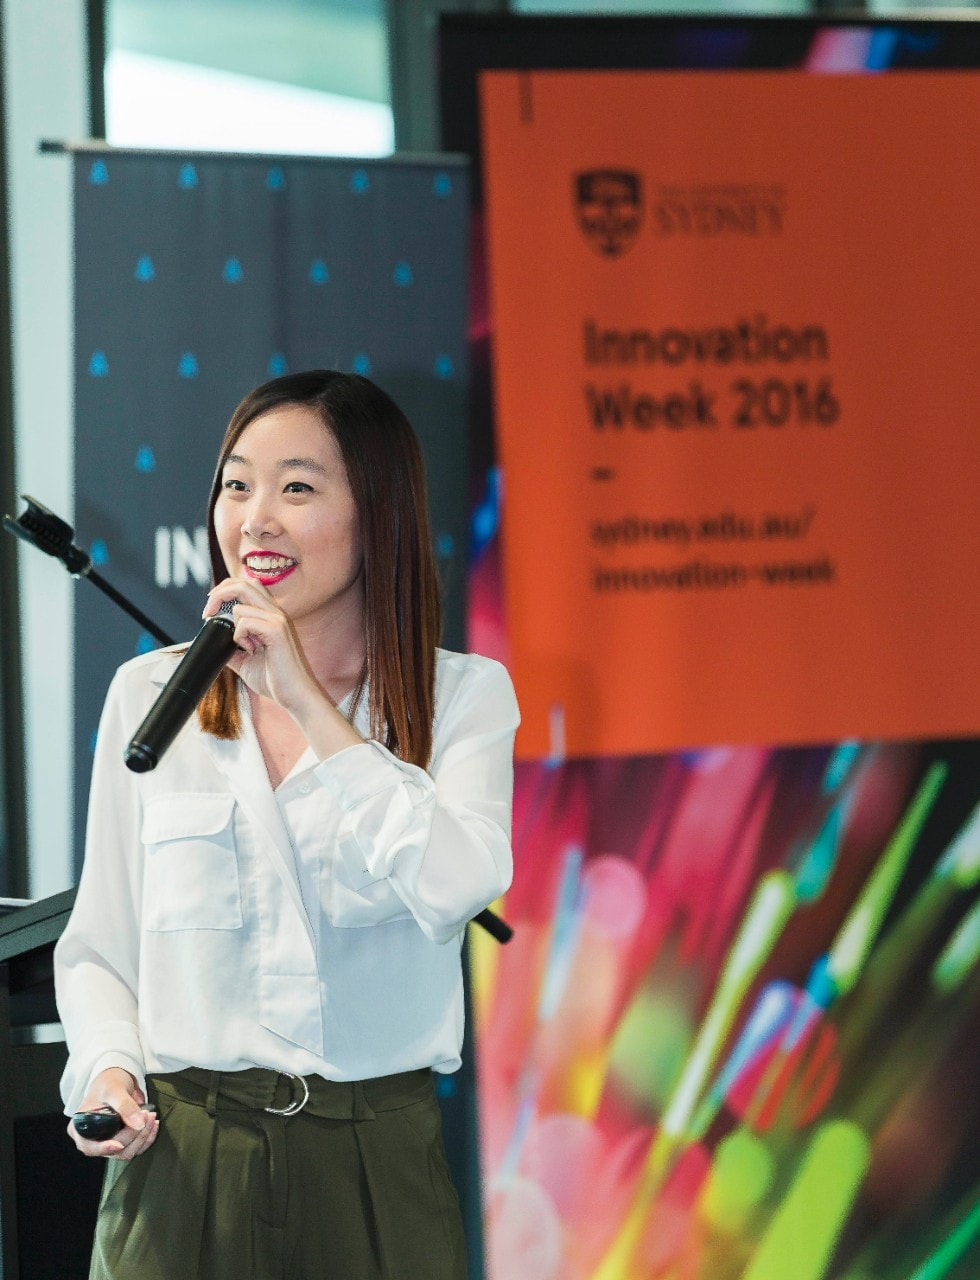 Queenie Ling won a mentoring award for her presentation pitch